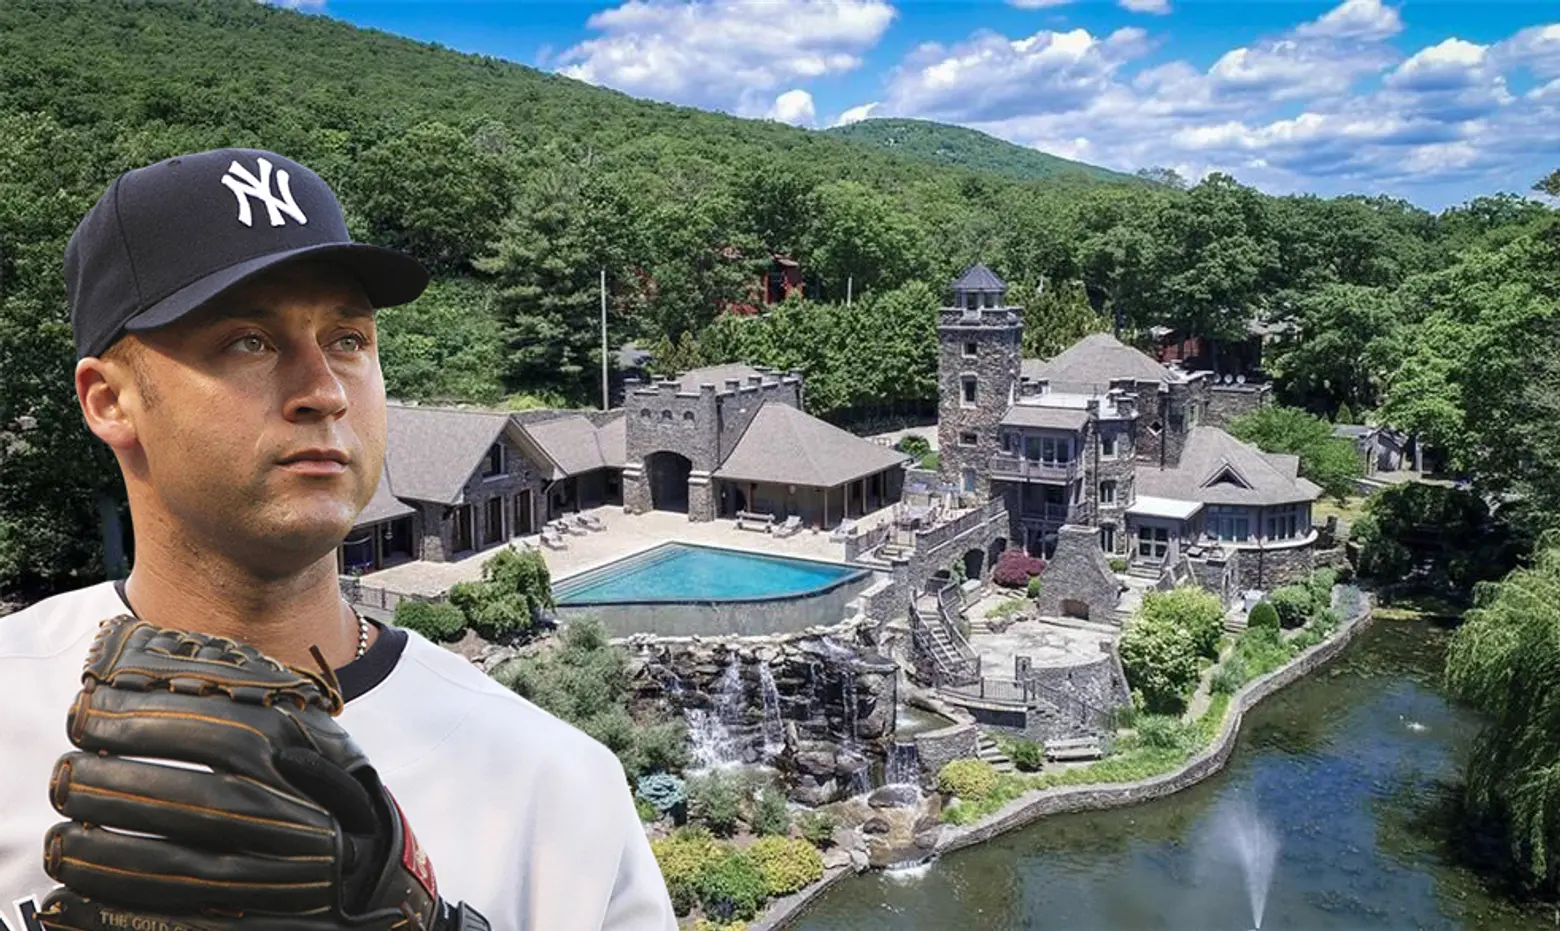 Derek Jeter lists lakefront ‘castle’ with four kitchens and a Statue of Liberty replica for $15M